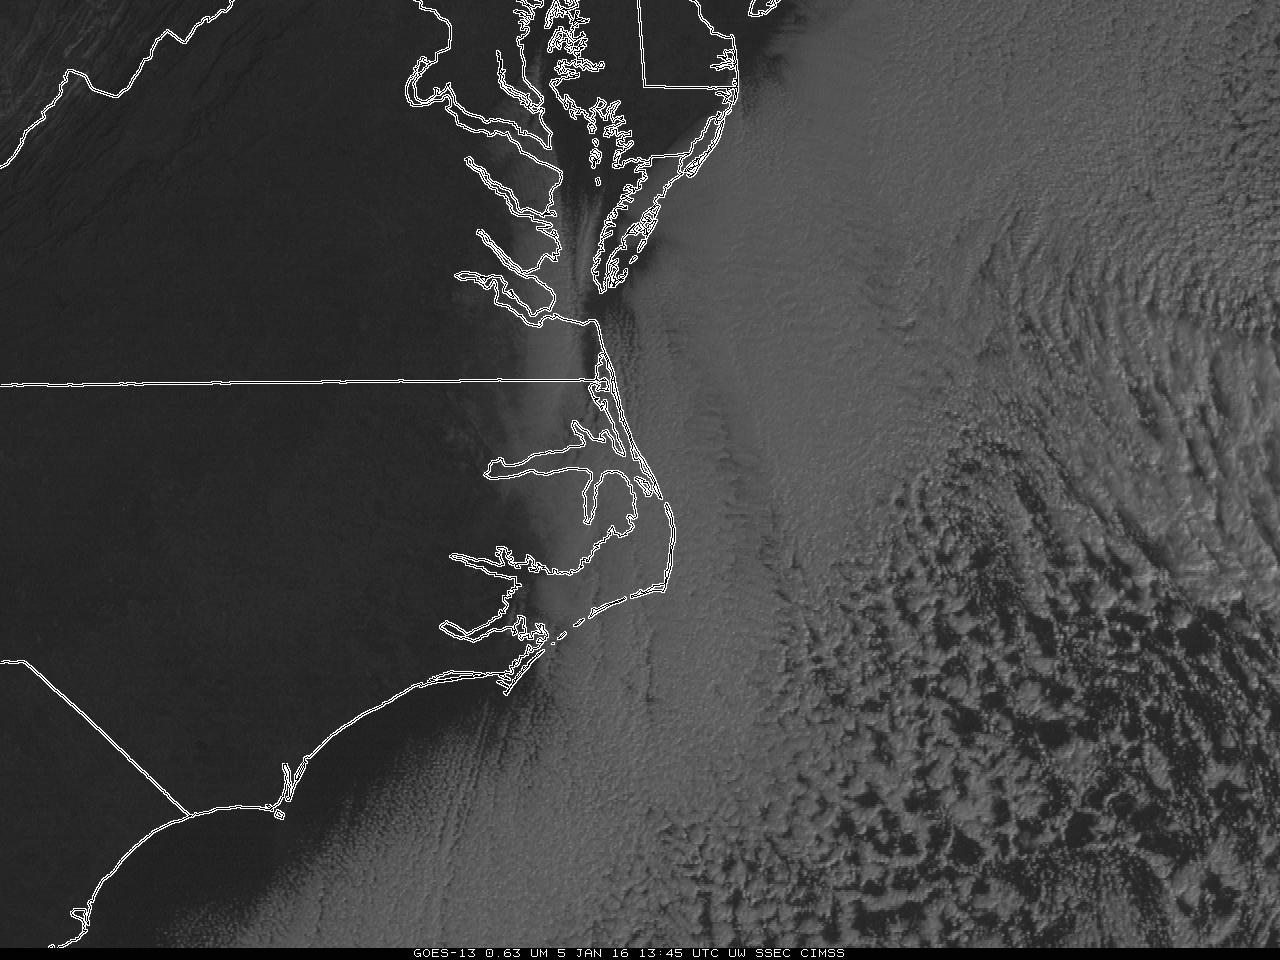 GOES-13 Visible (0.65 µm) Imagery, 1300-2045 UTC on 5 January 2015 [click to animate]